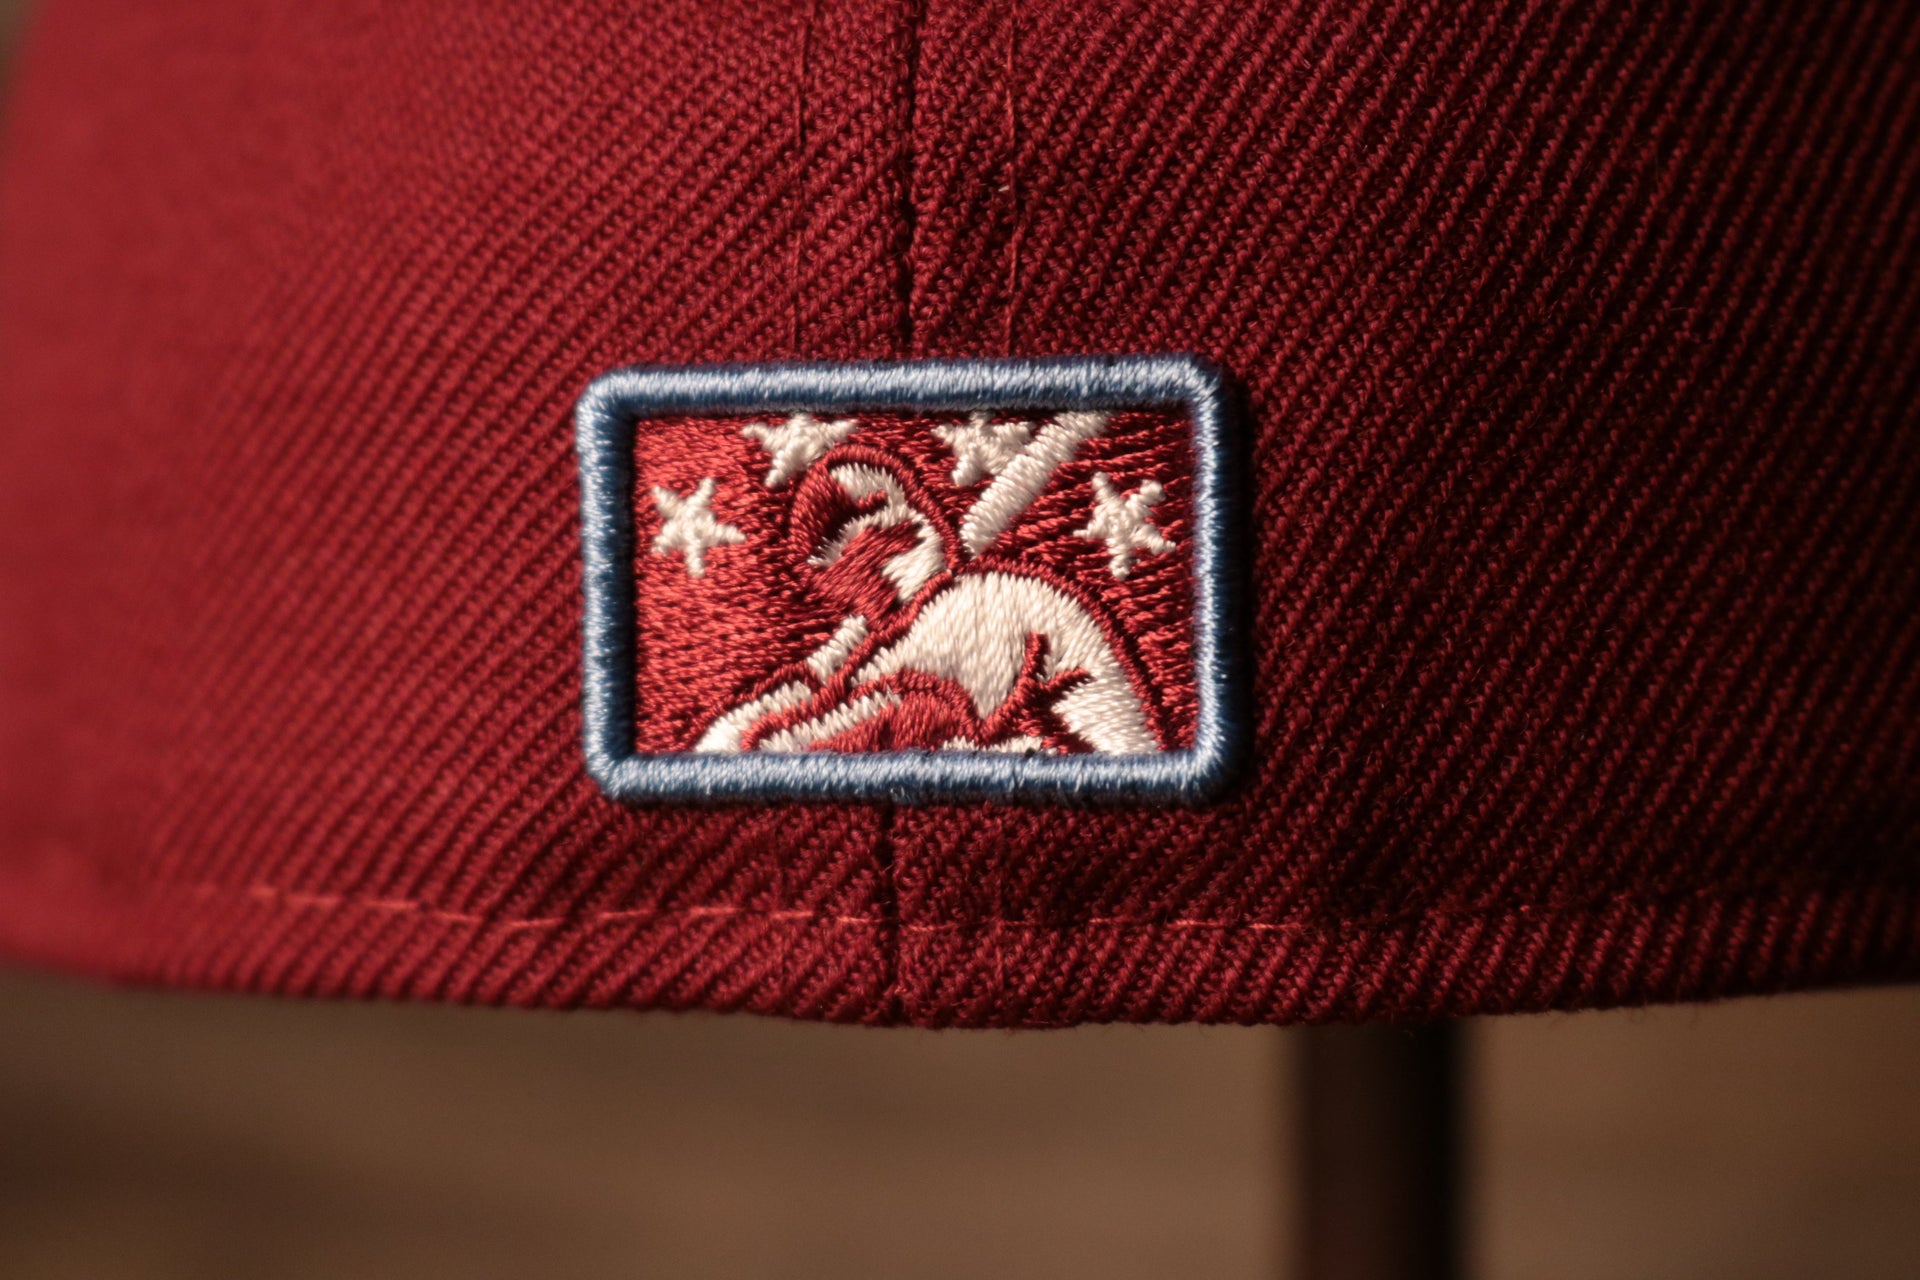 the minor league logo is burgundy and light blue Grey Bottom Fitted Cap | Jawn Burgundy Gray Bottom Fitted Hat